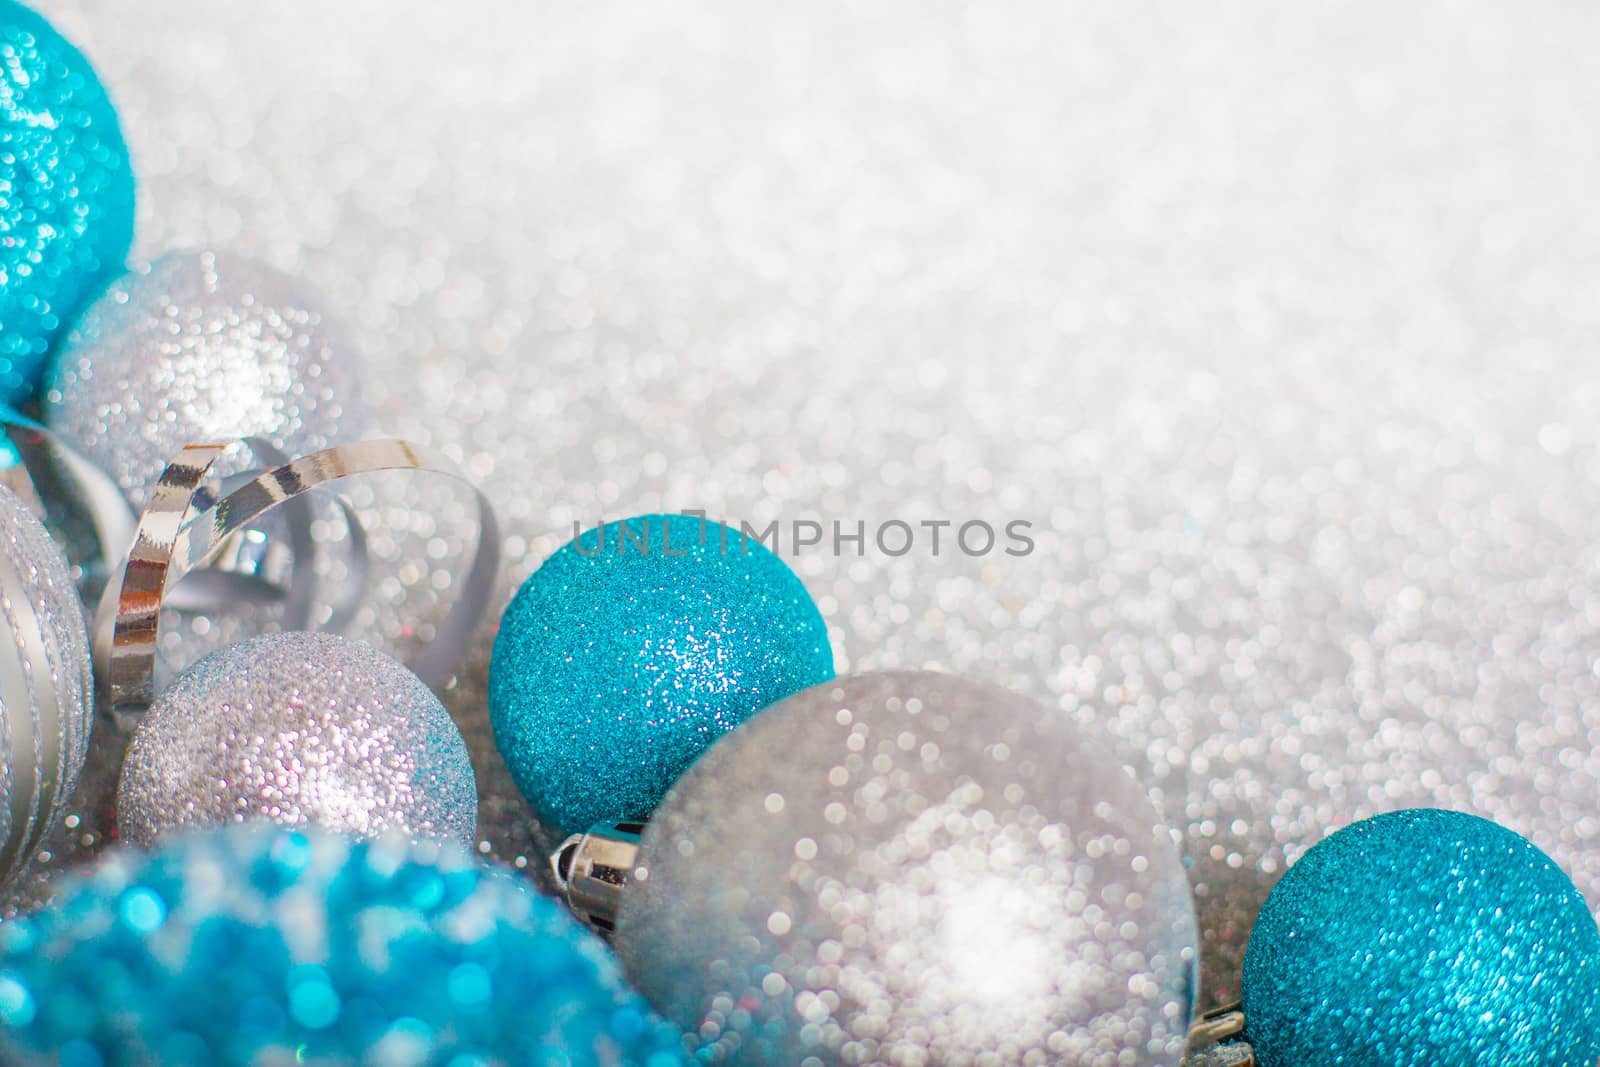 Christmas decoration of colorful glitter balls on silver glitter background with copy space for text new year card concept